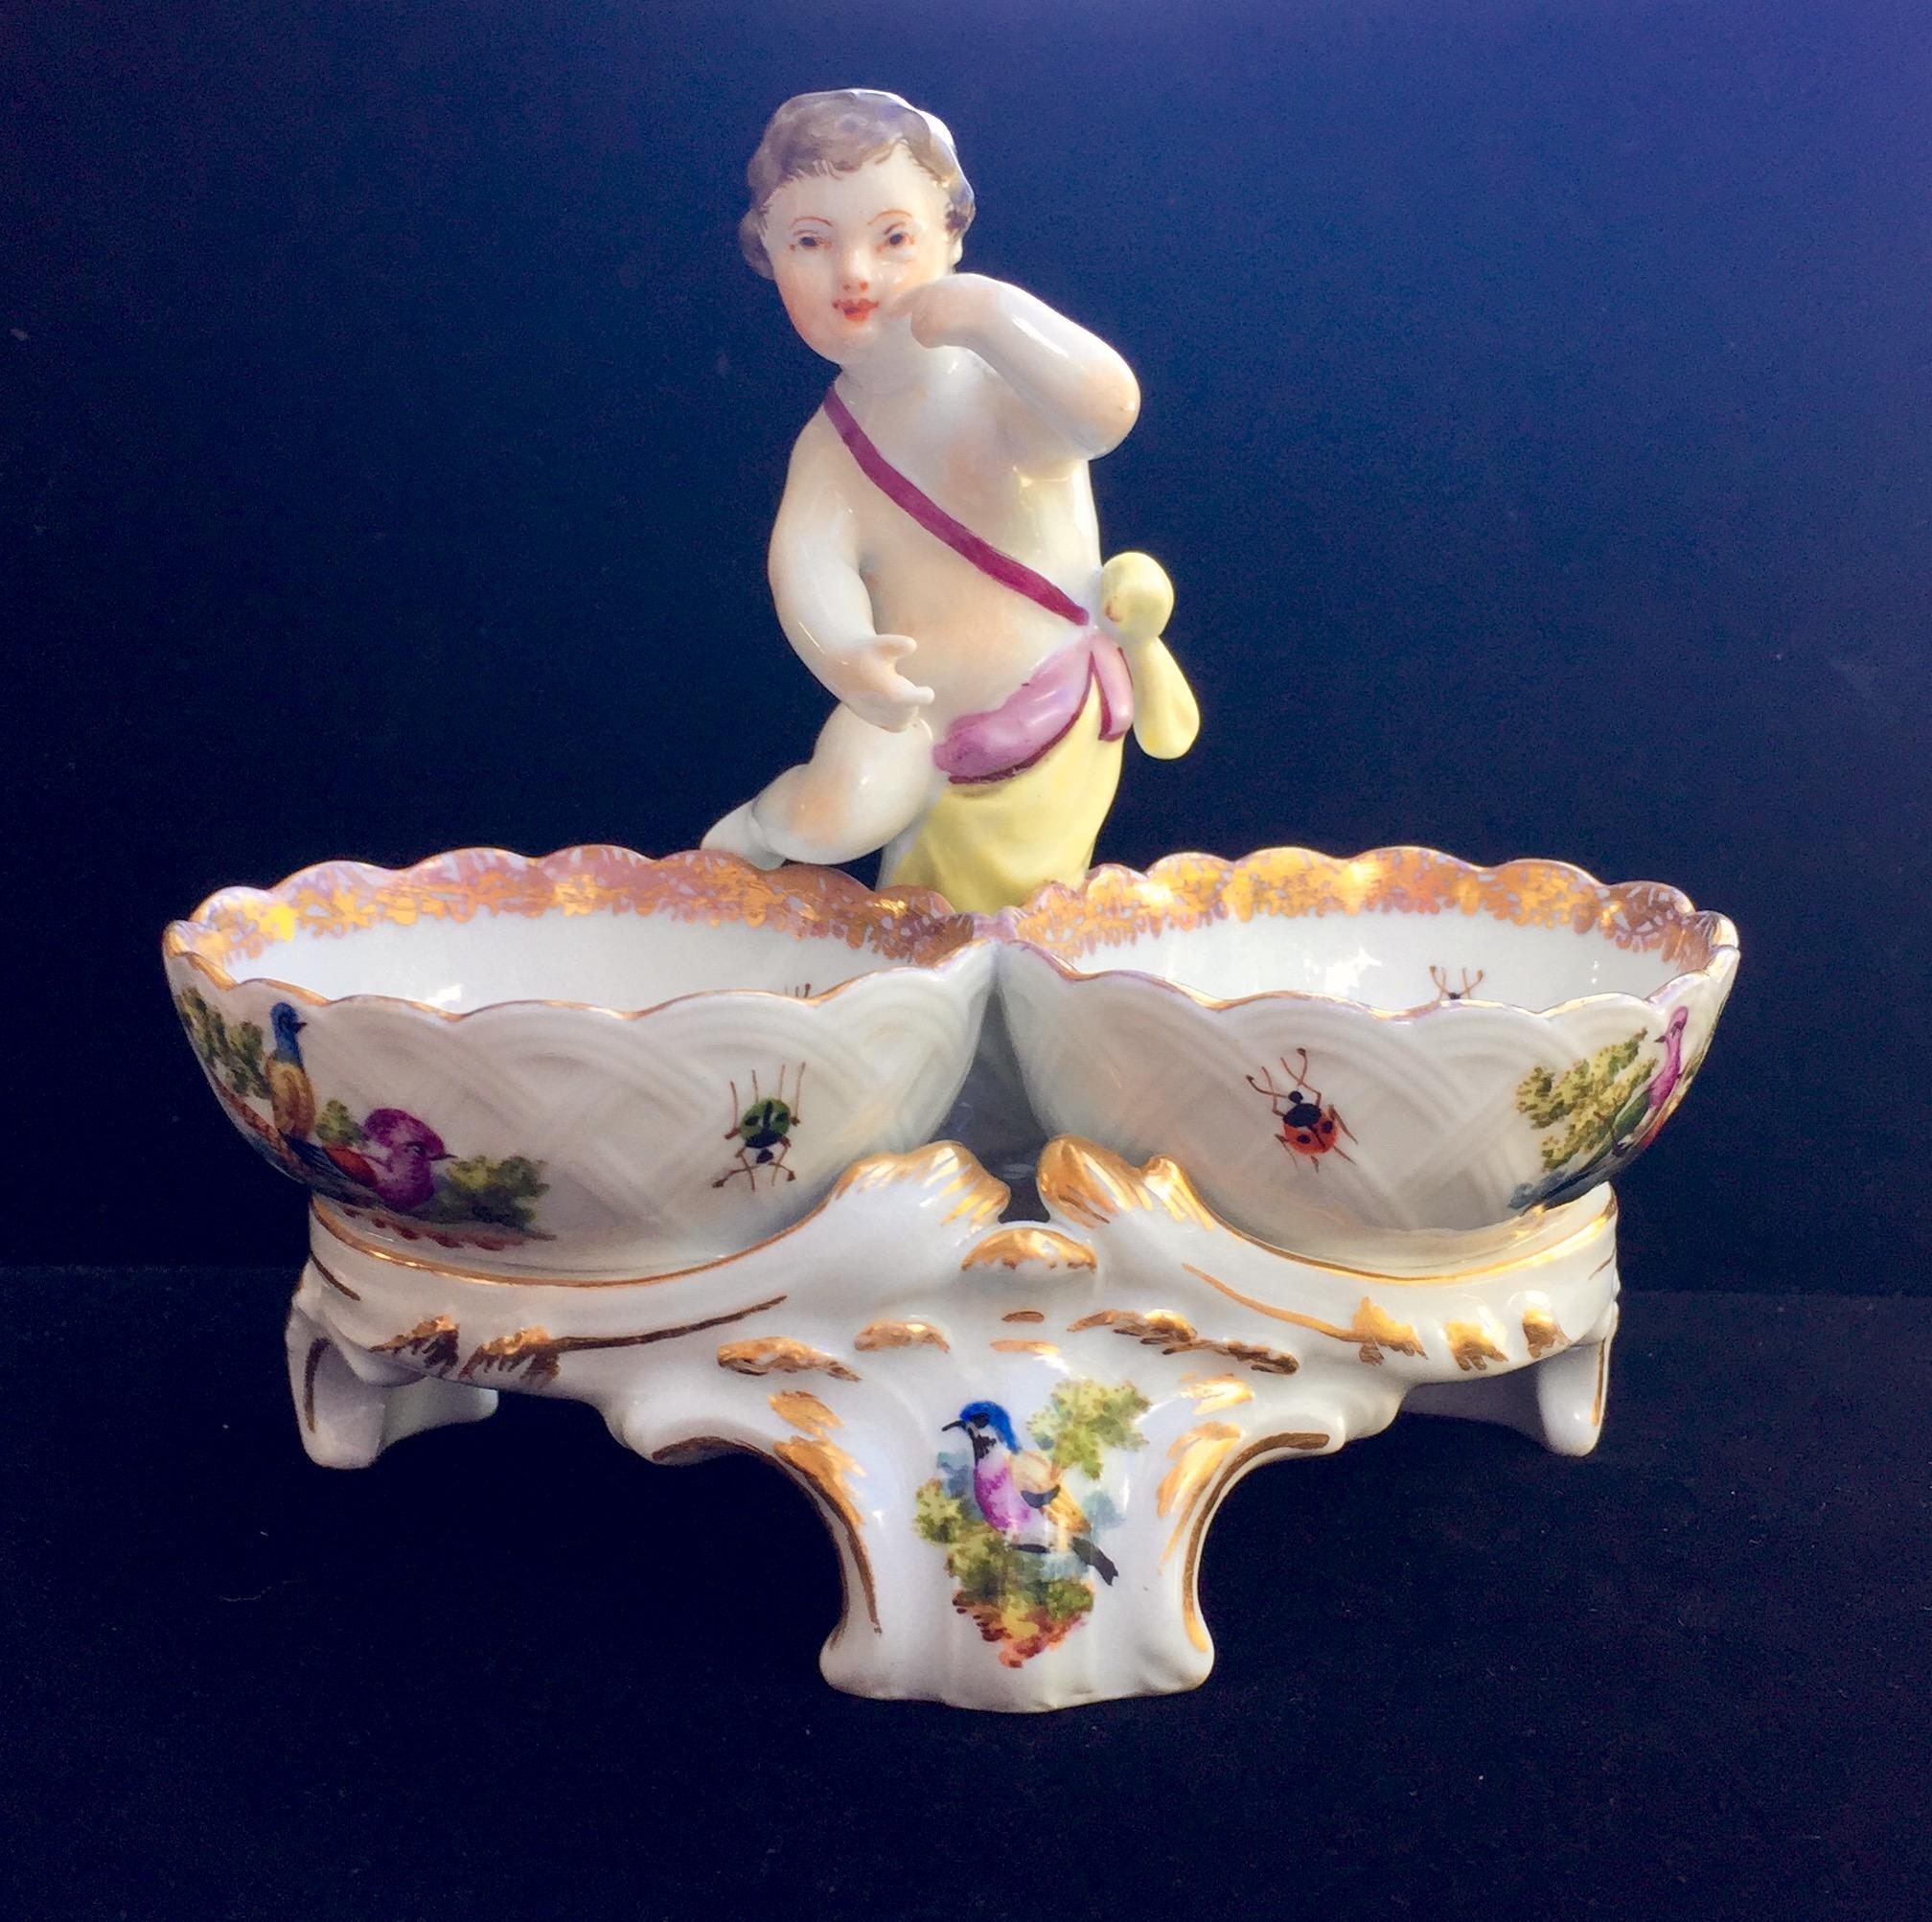 This open salt was made in the 19th century in typical Rococo style. The interior of the salt basin and the stand is delicately painted with birds, flowers and insects. In the center, on top, stands a figure of an gesticulating cherub. 

Delicate